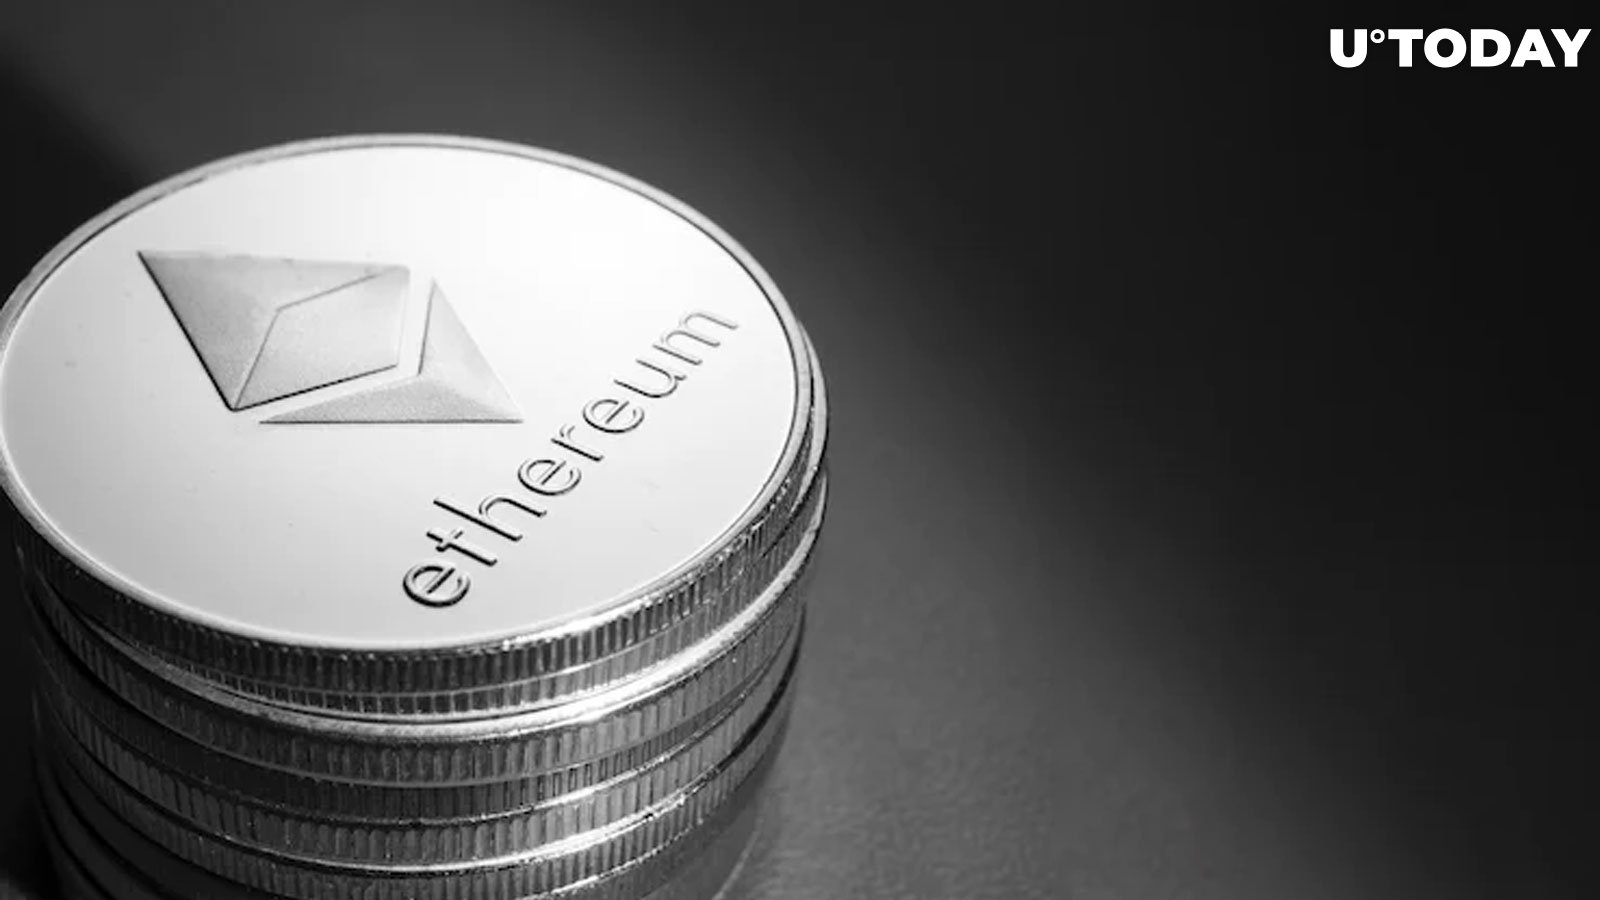 Ethereum Becoming More Popular with Institutions, Fidelity Survey Shows